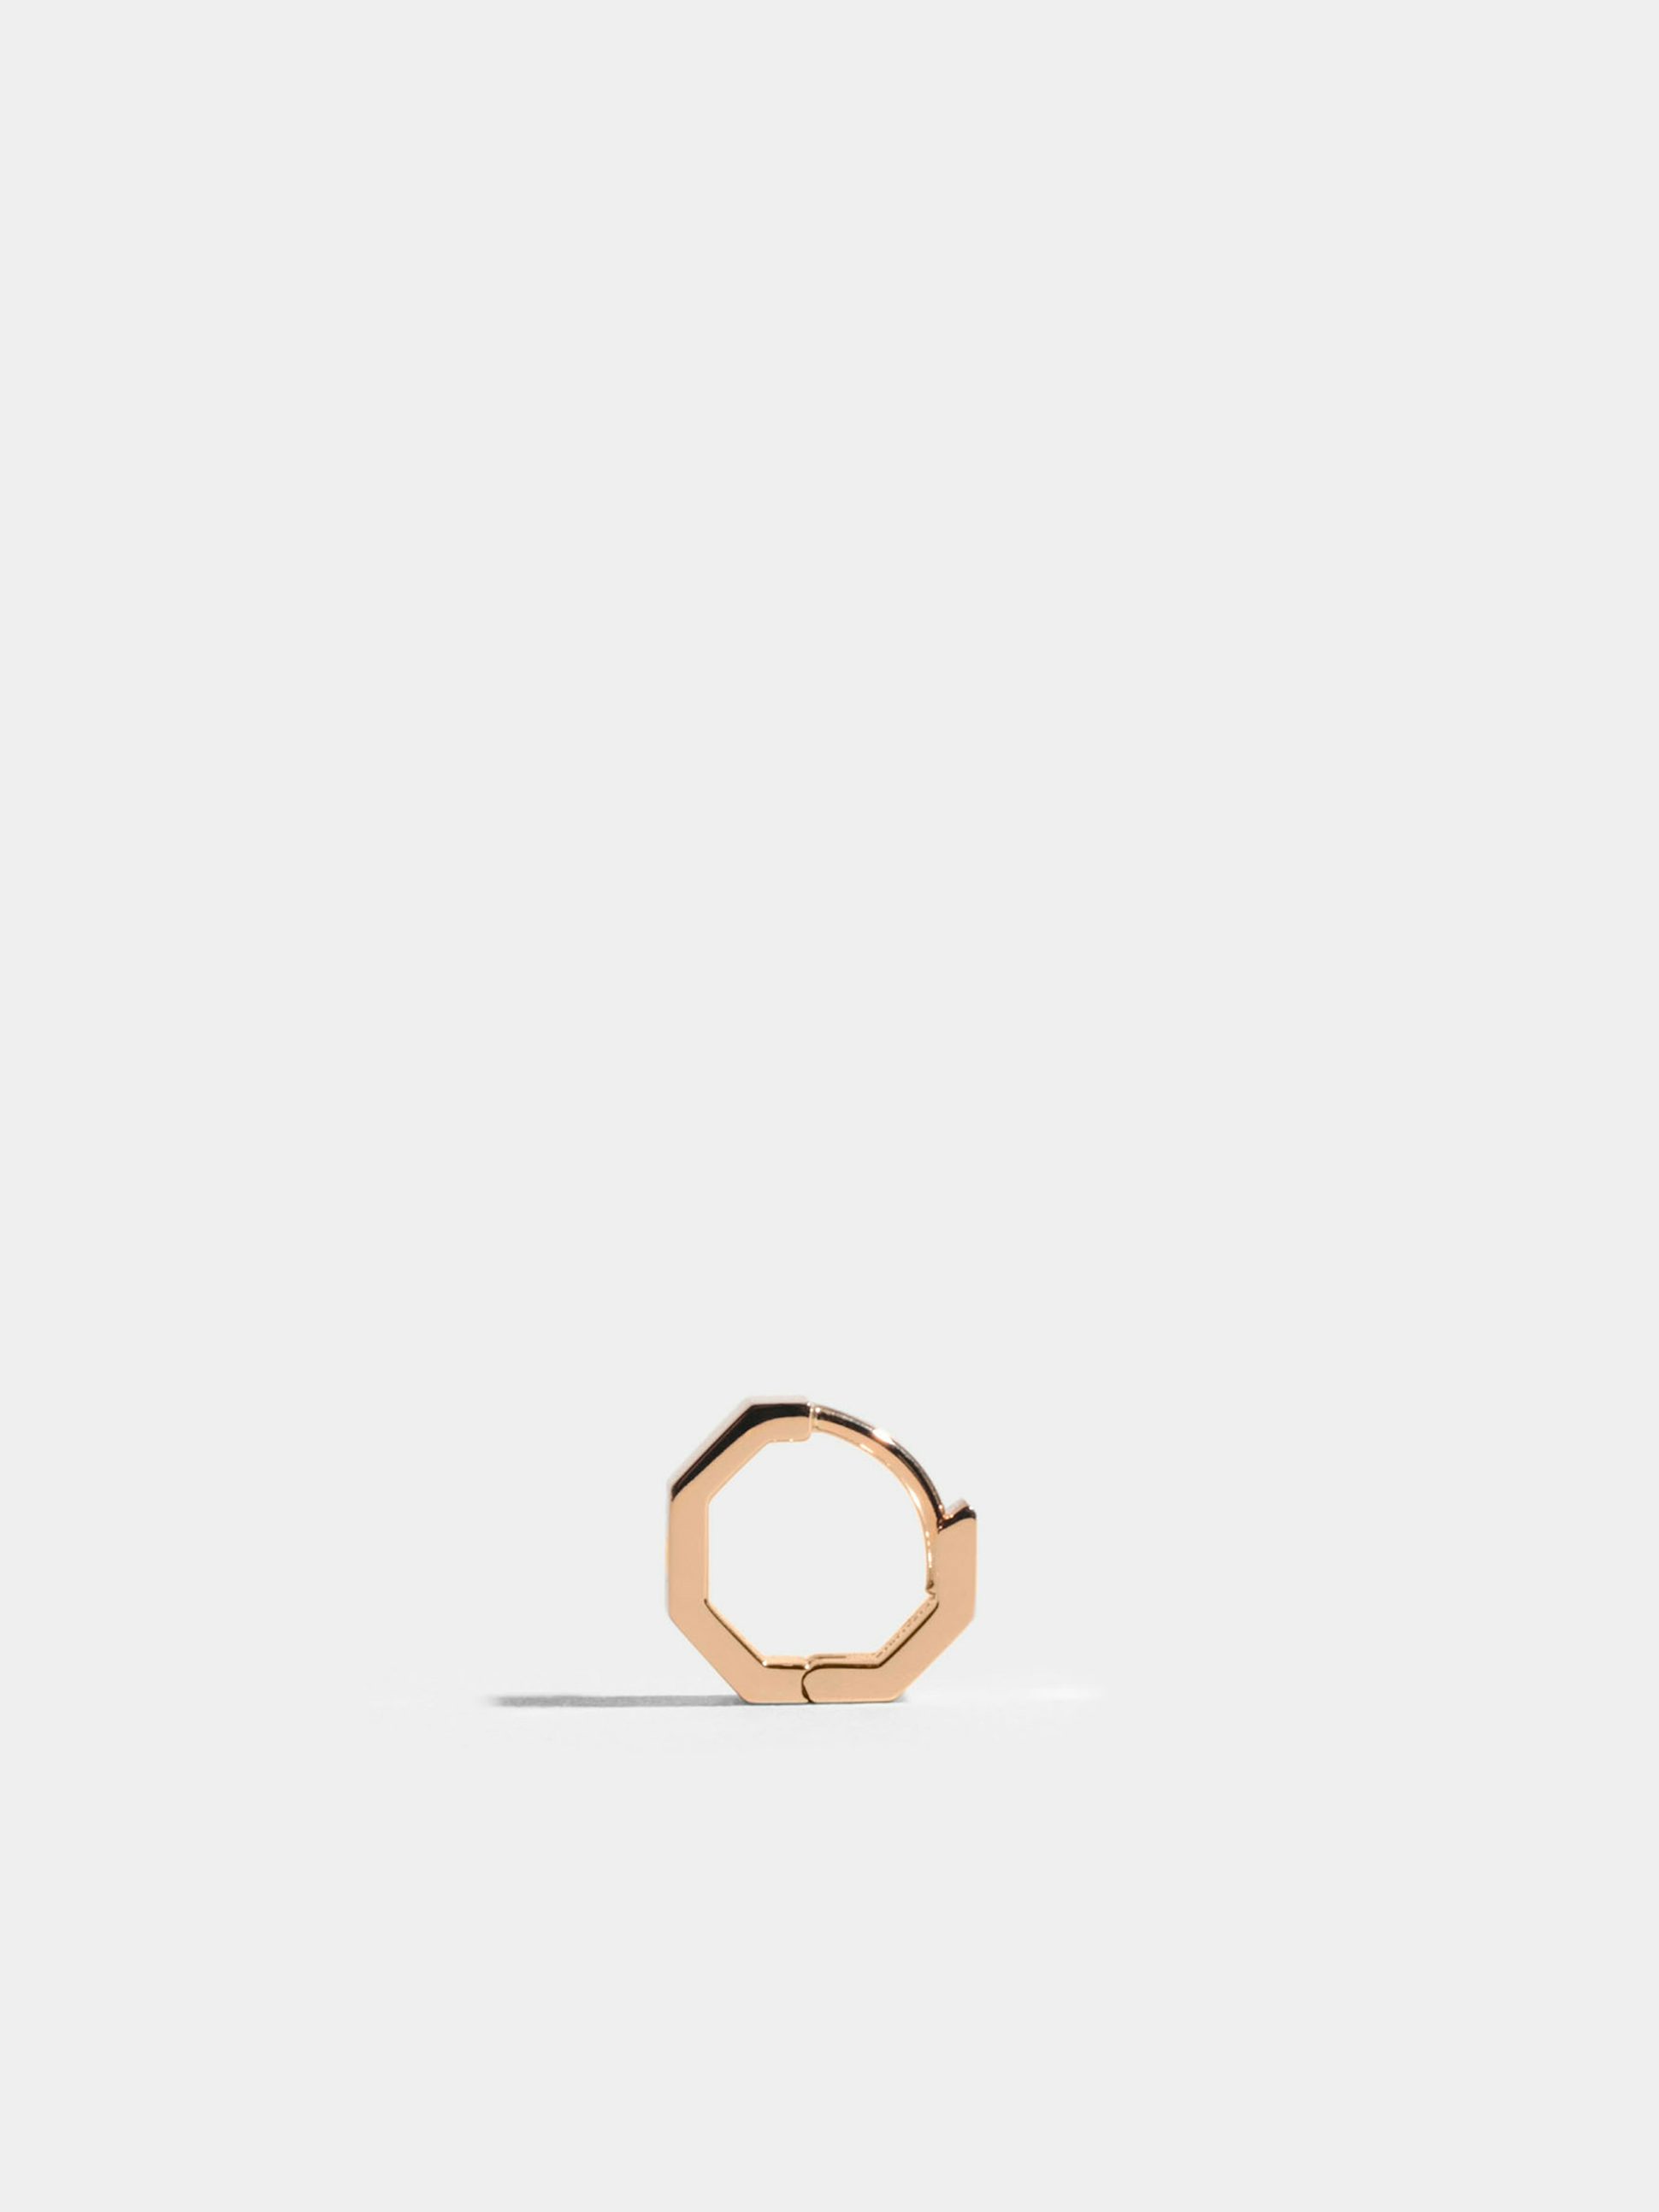 Octogone single-loop in 18k Fairmined ethical rose gold, the unity.